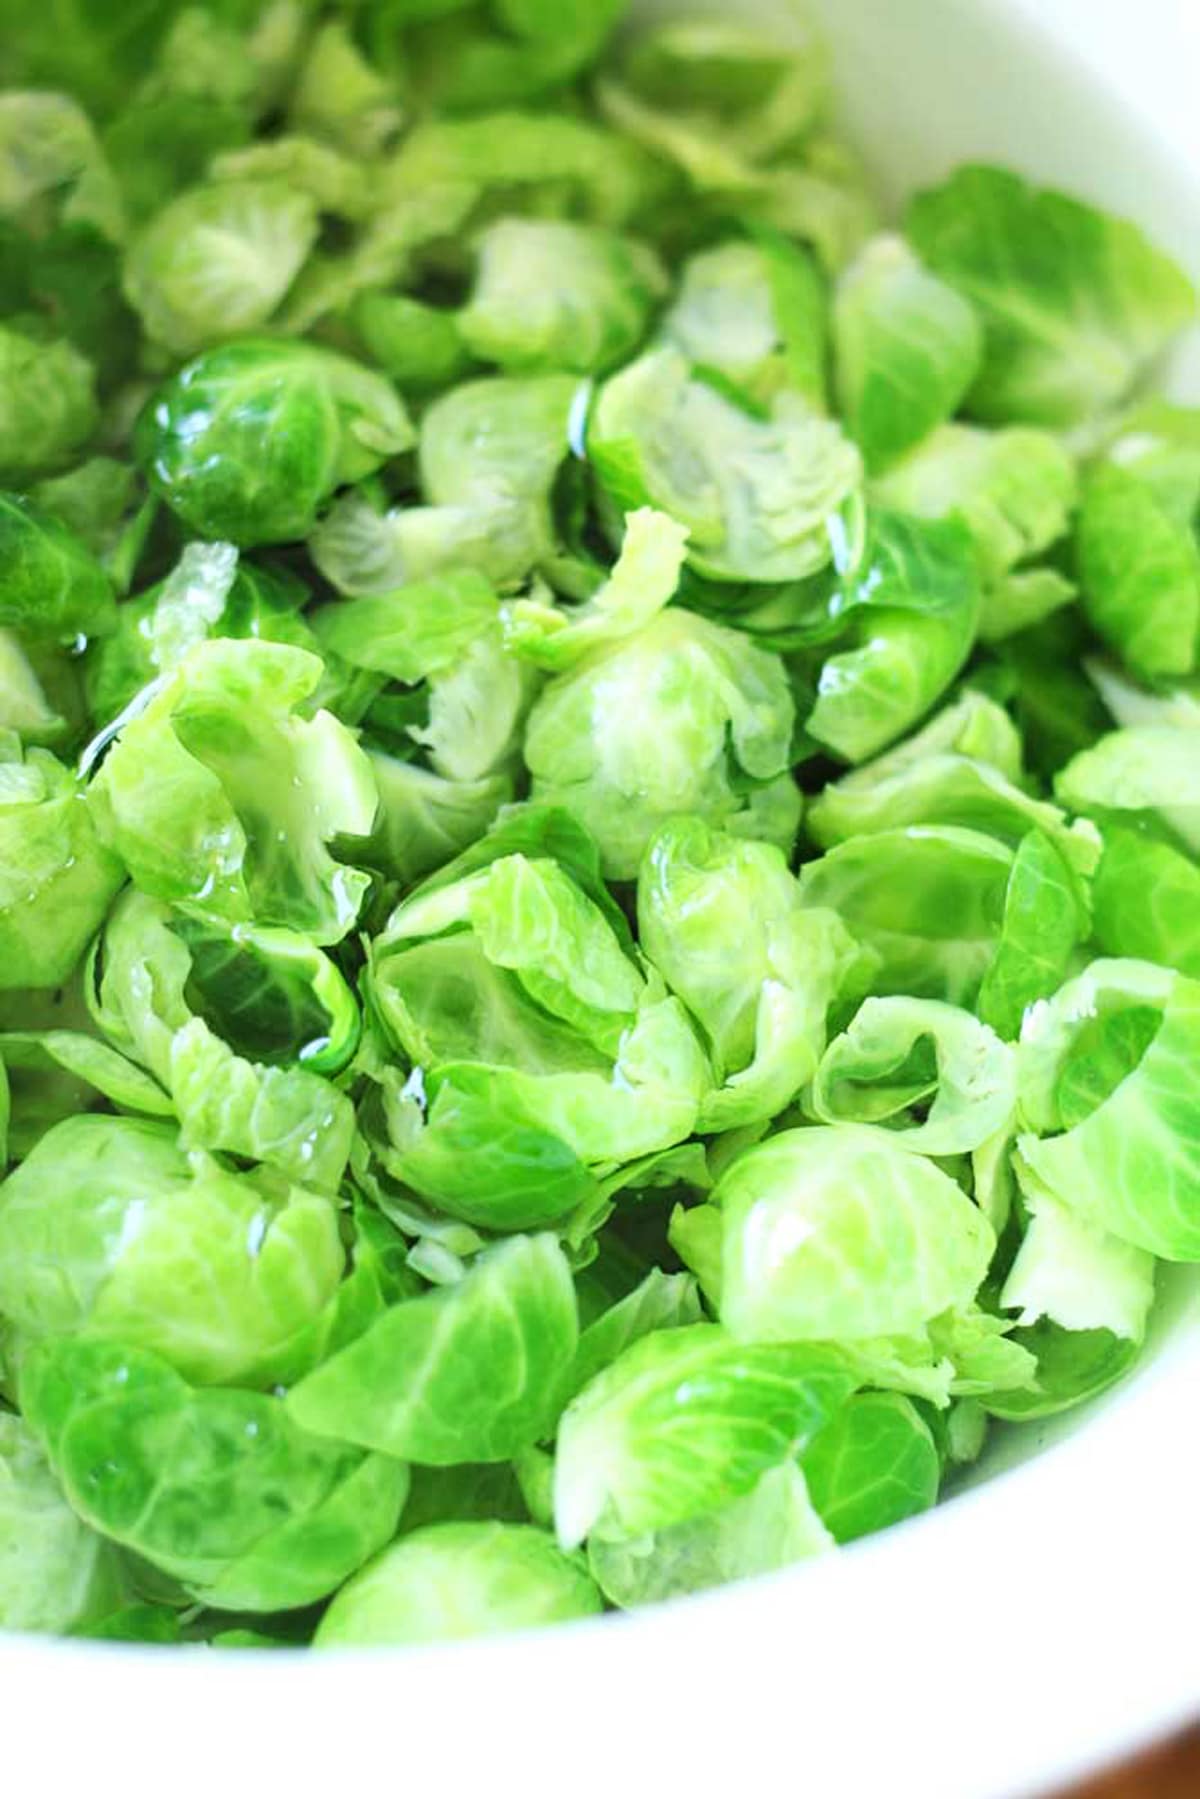 Blanched Brussel Sprouts in a bowl of ice water.